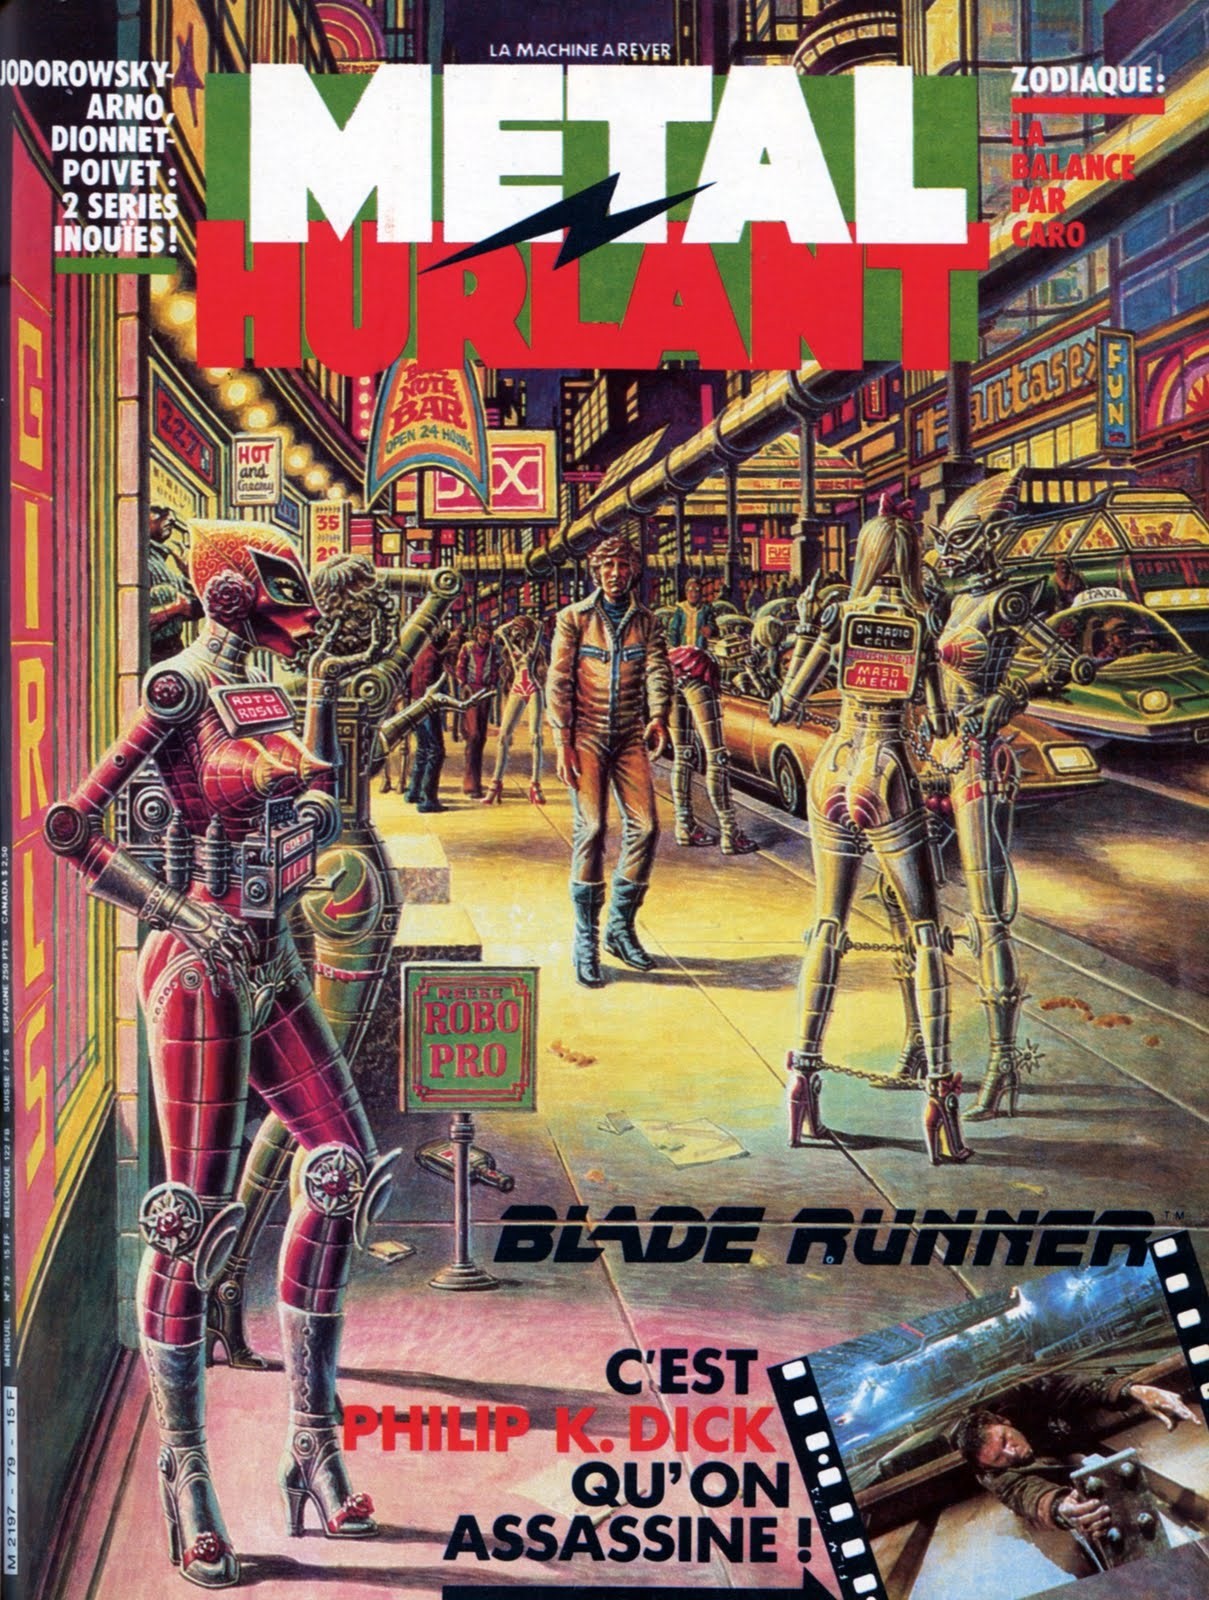 The French sci-fi comic that inspired Blade Runner and Akira | Dazed